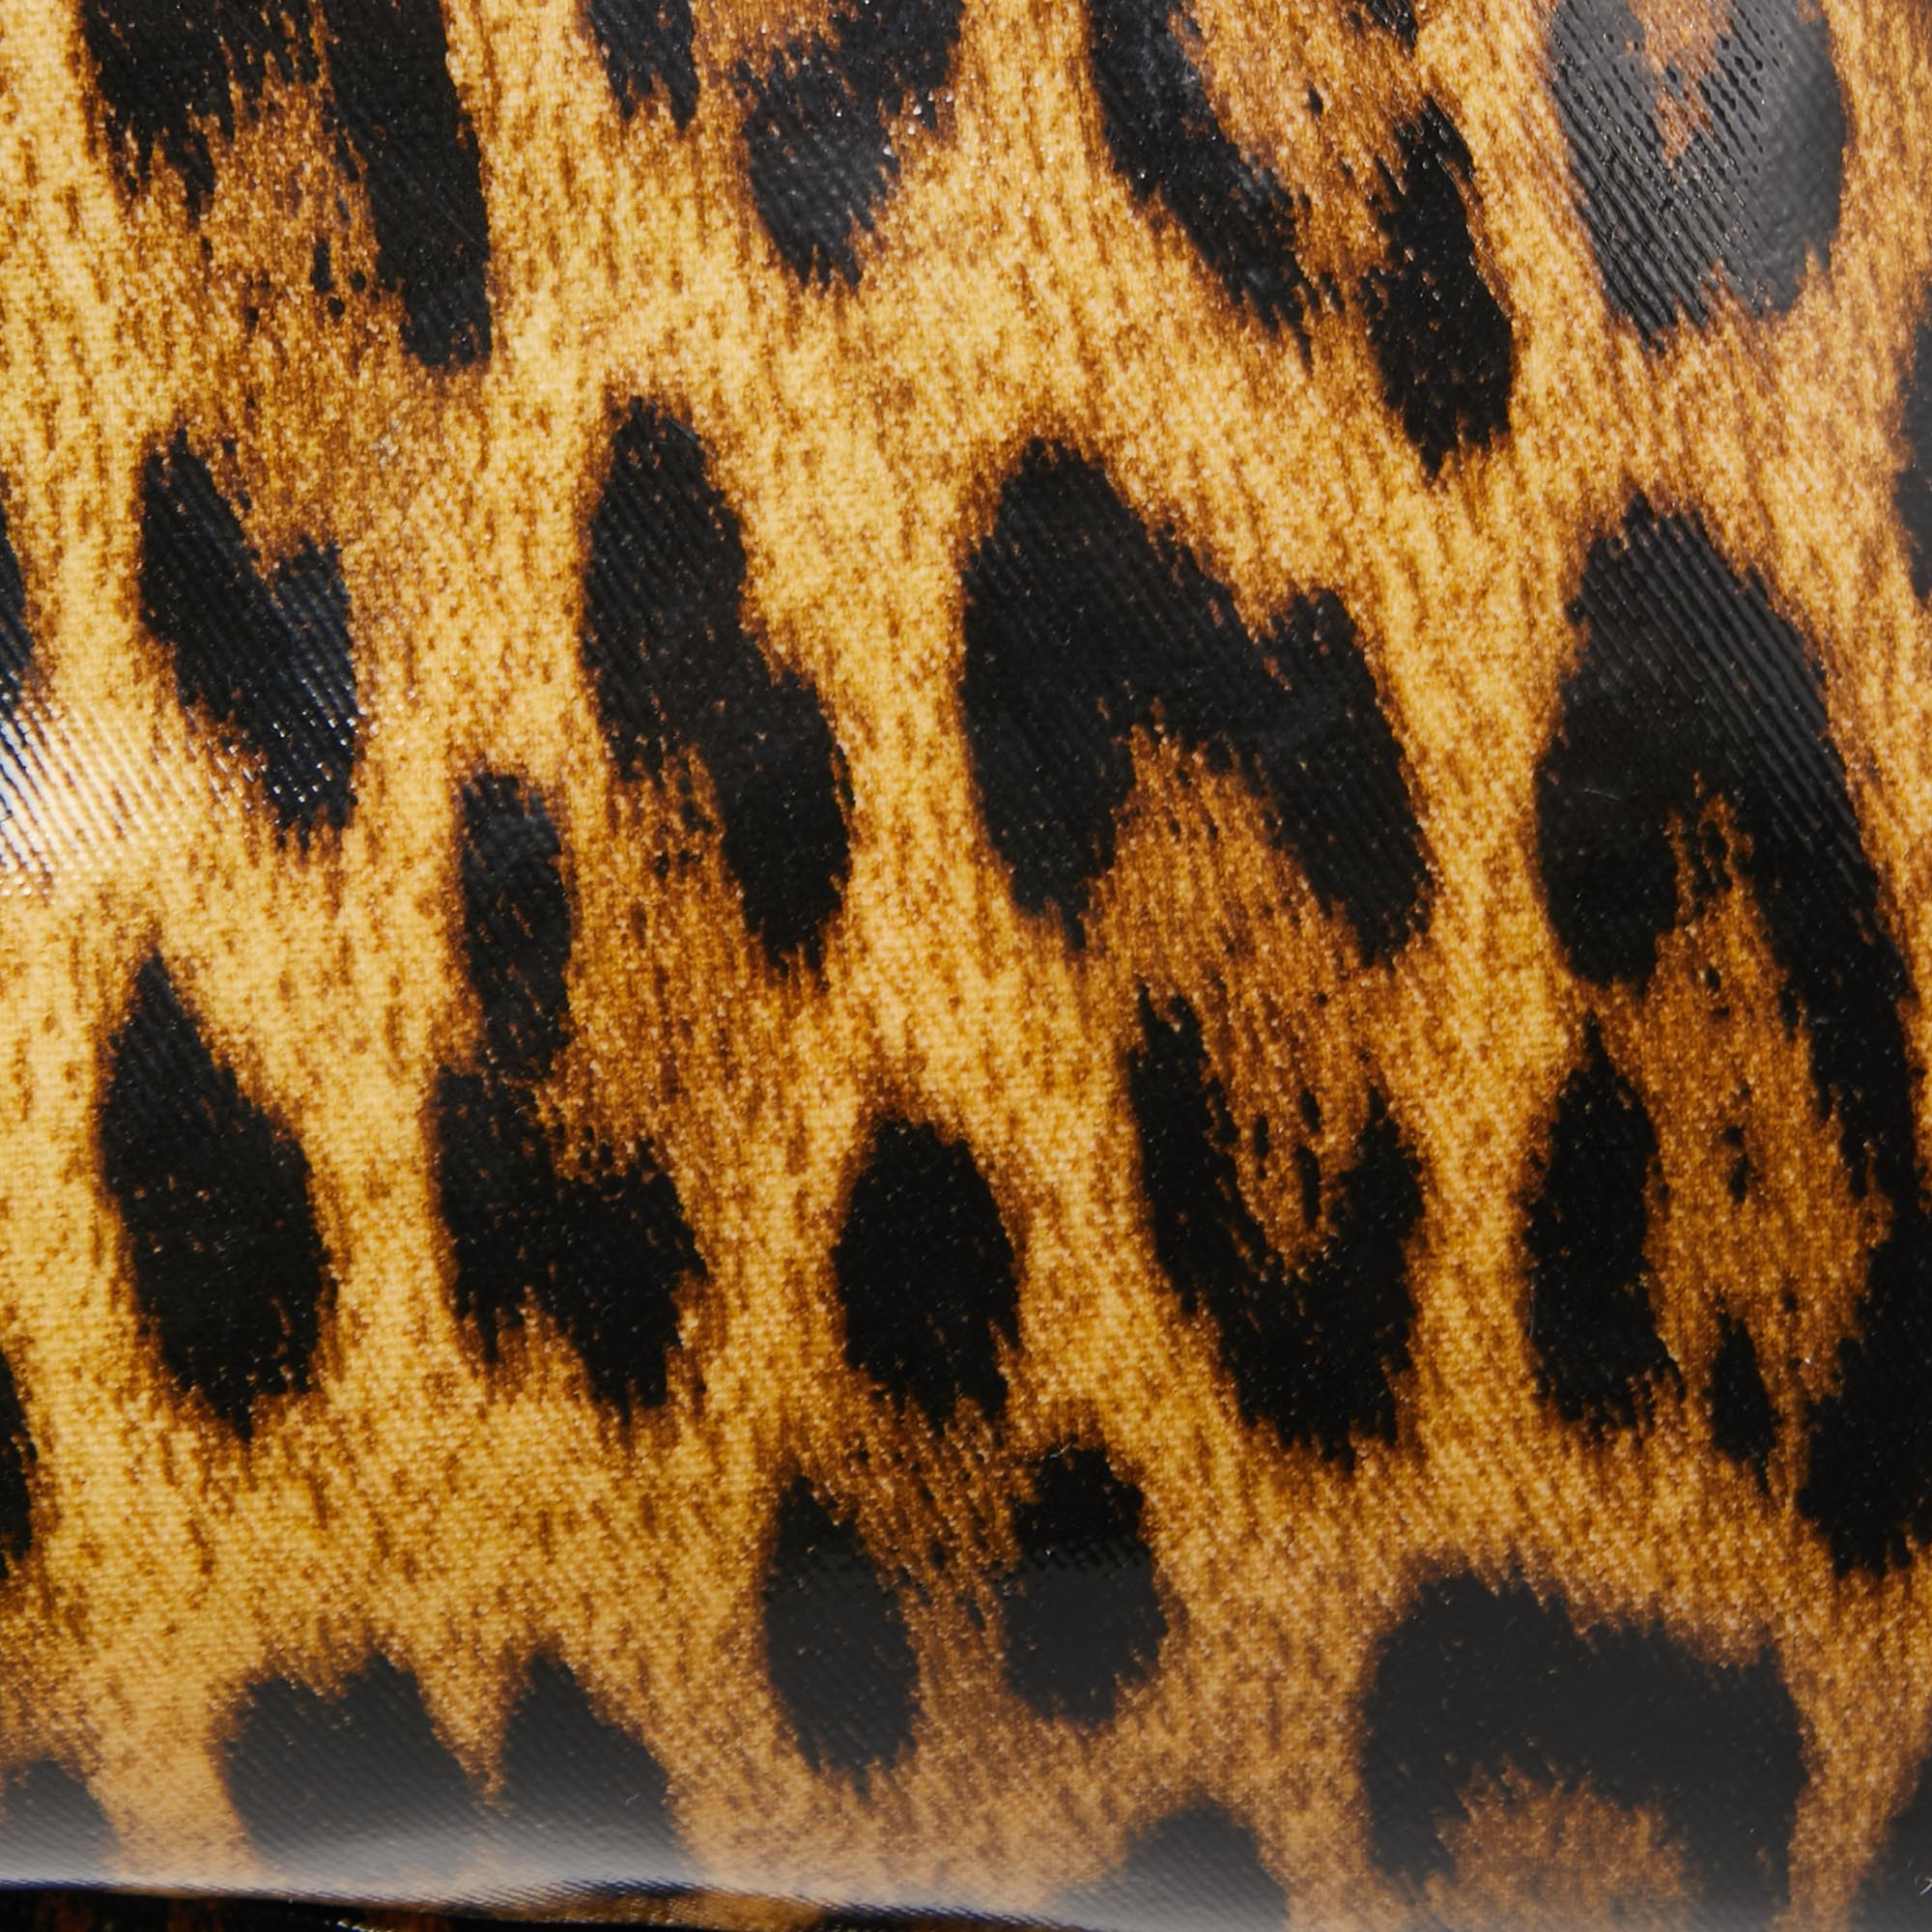 Roberto Cavalli Brown/Black Leopard Print Coated Canvas Cosmetic Pouch